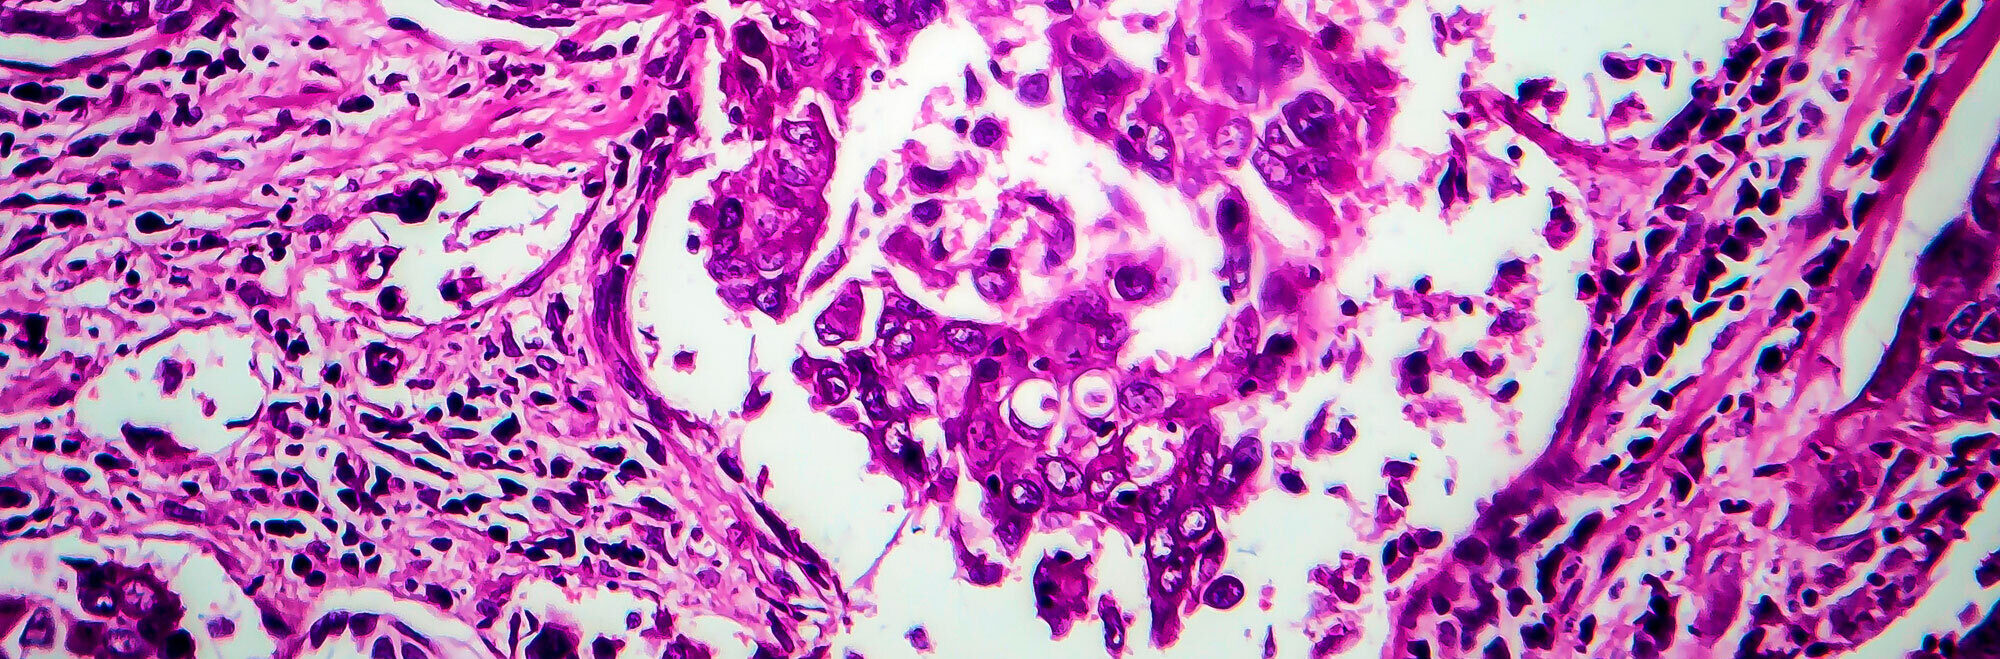 Breast ductal carcinoma